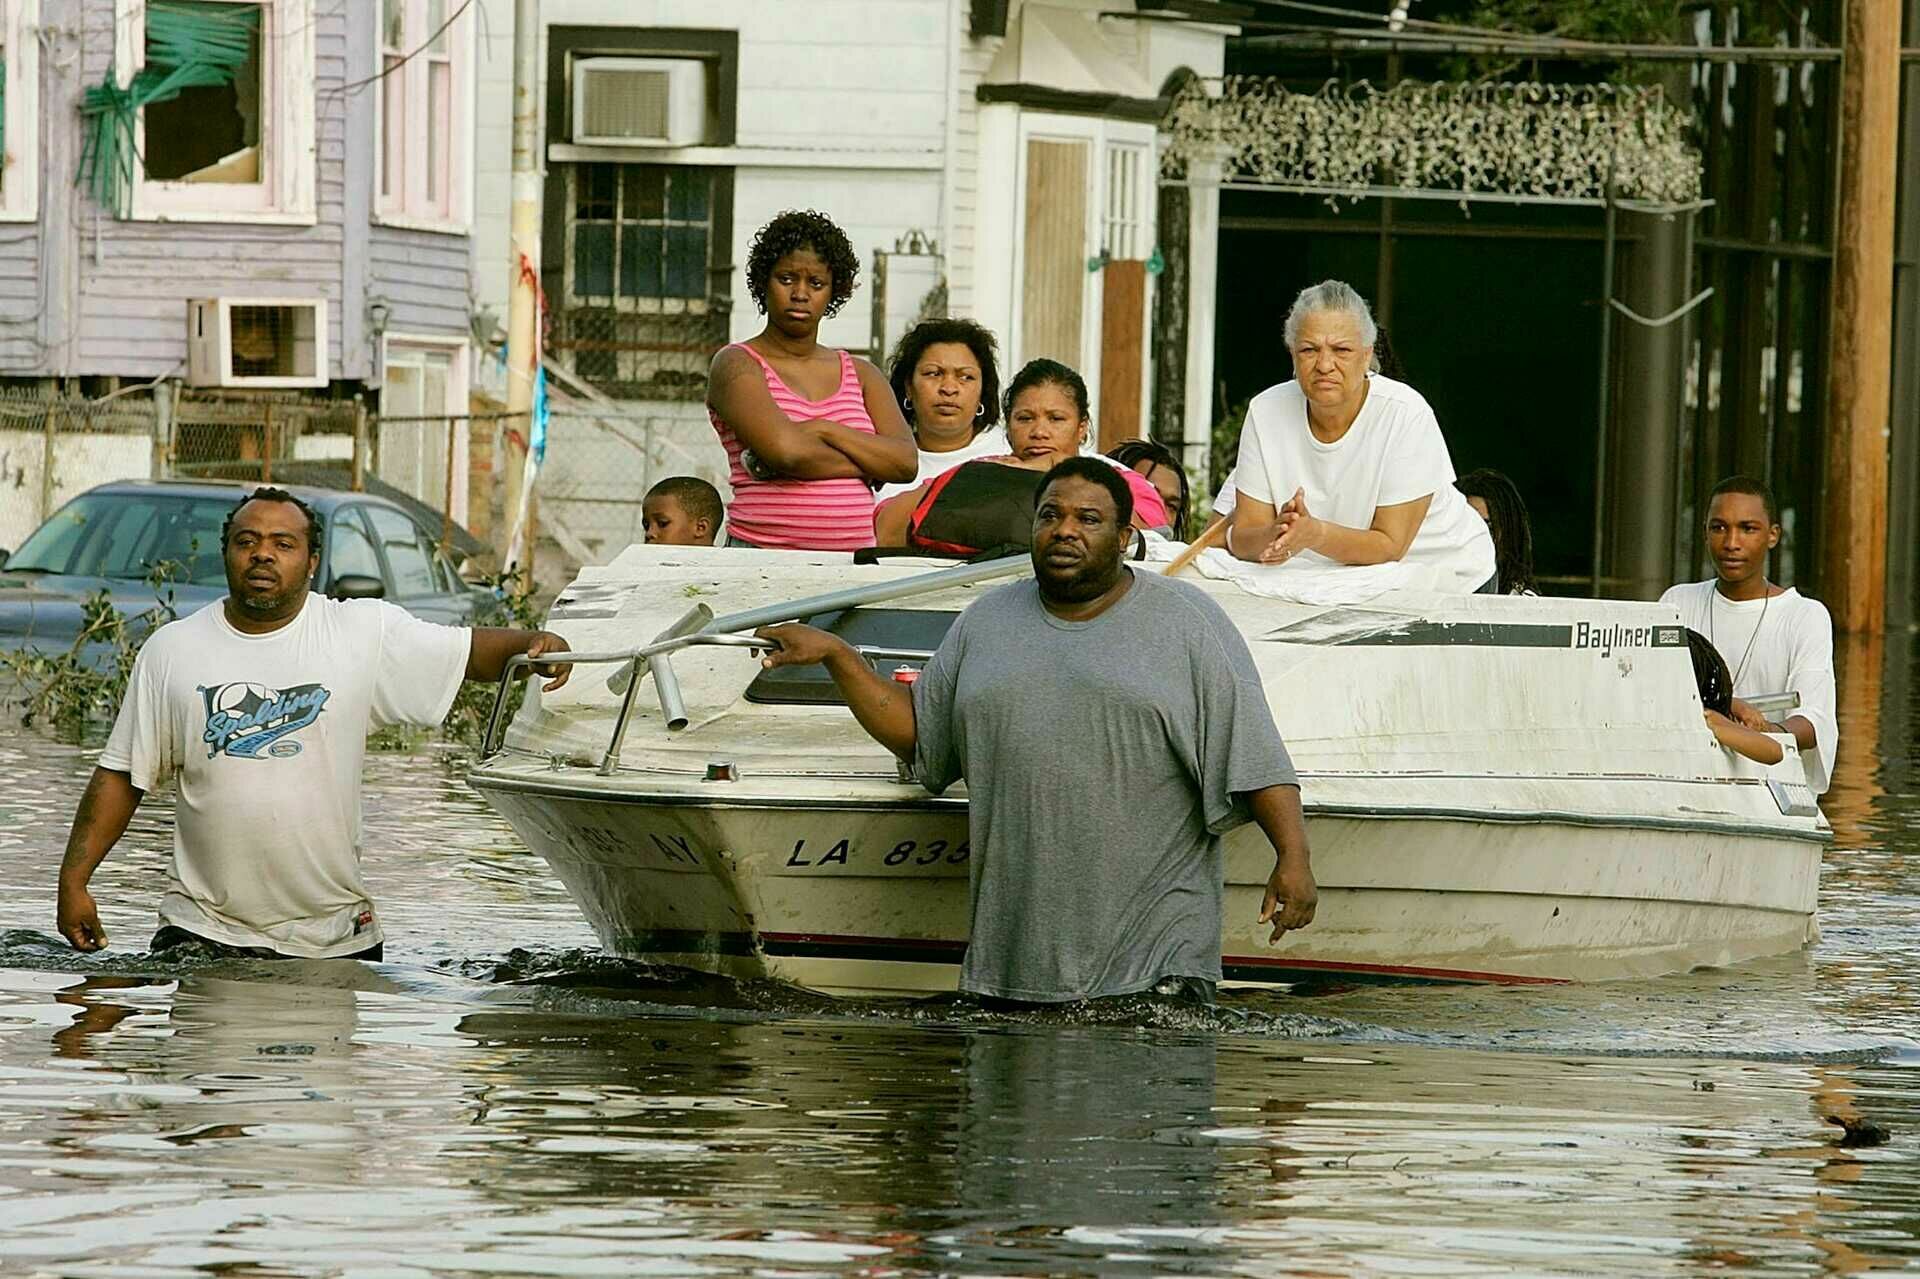 The Bitter Lesson of Katrina: How the 2005 Hurricane Exposed the Flaws of US Civil Society